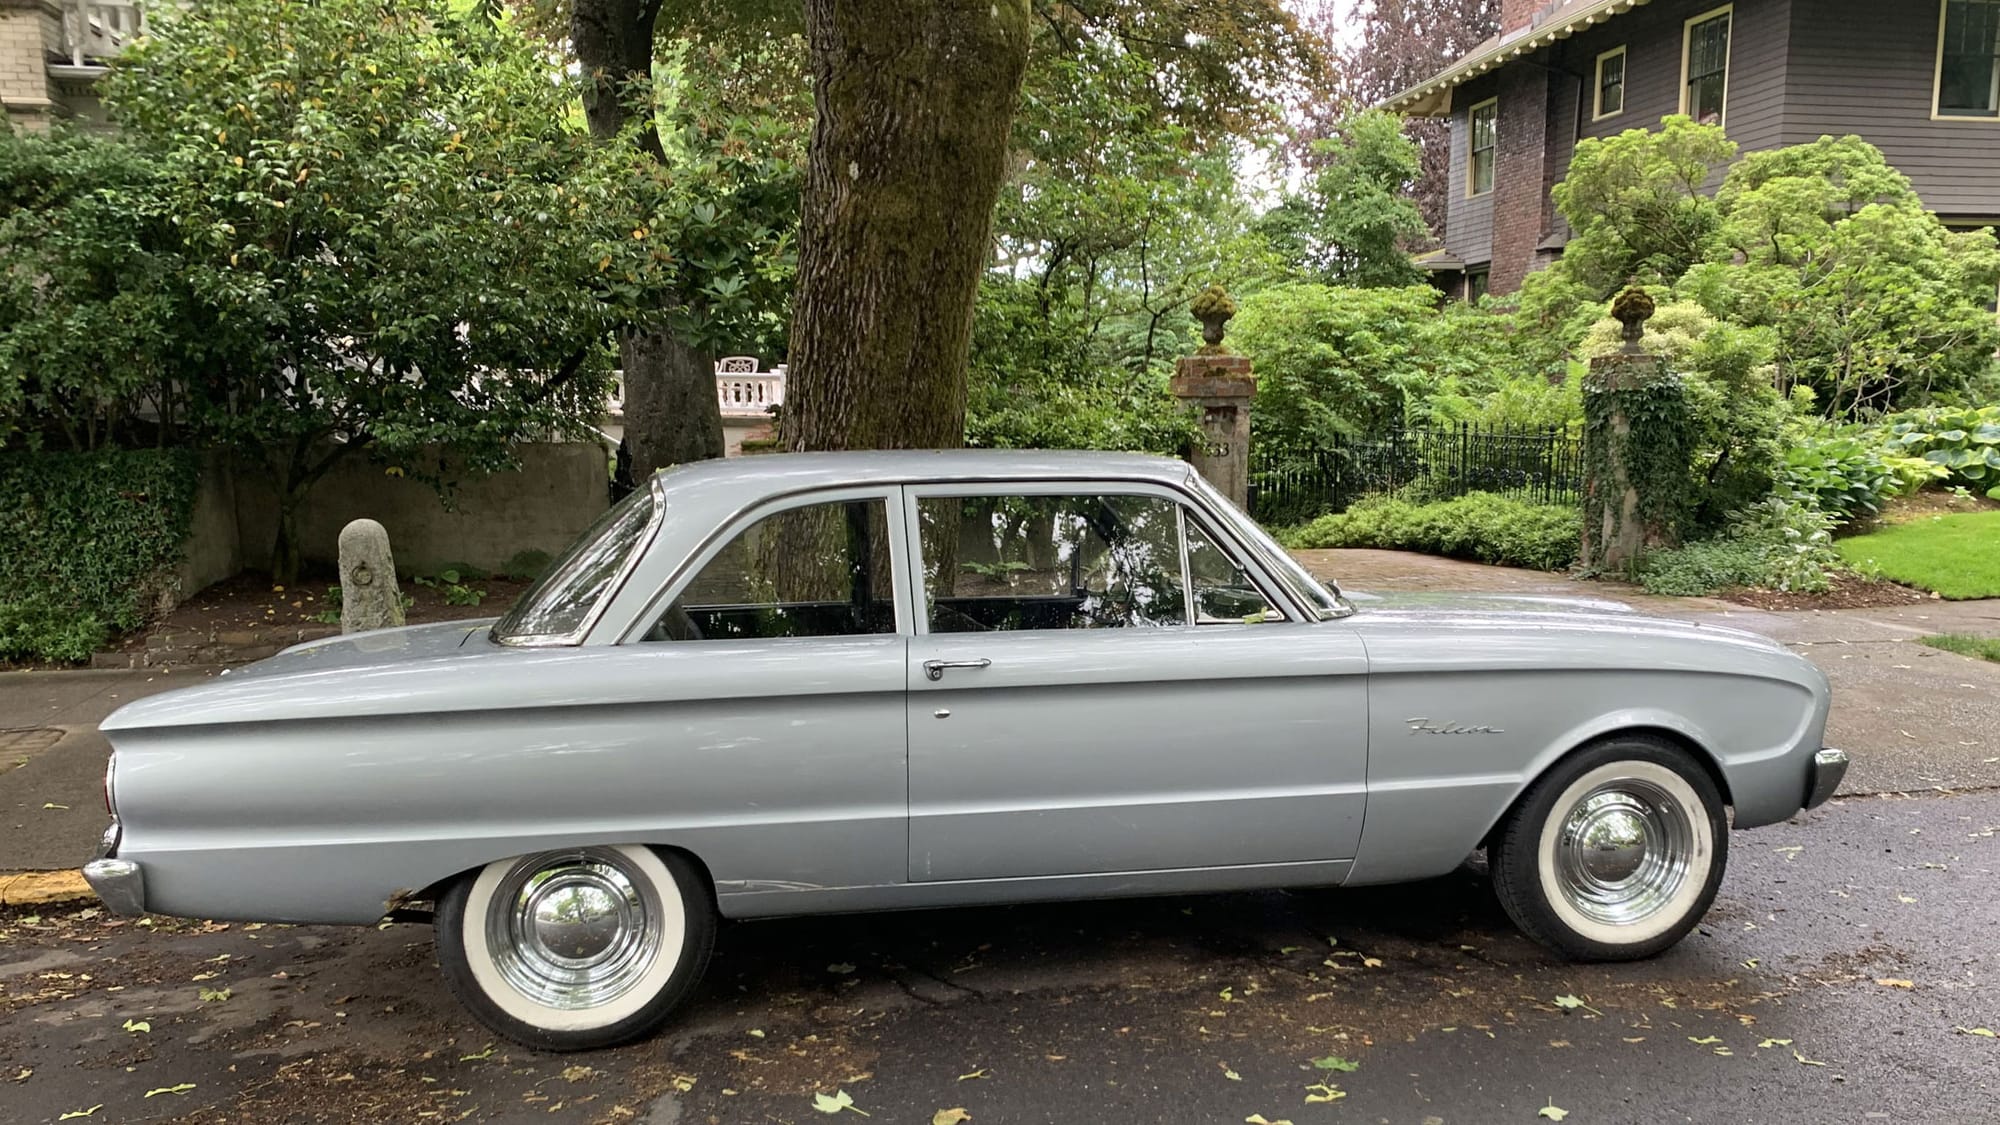 A silver Ford Falcon coupe parked in a handsome, leafy residential area, before a stone and wrought-iron gate 